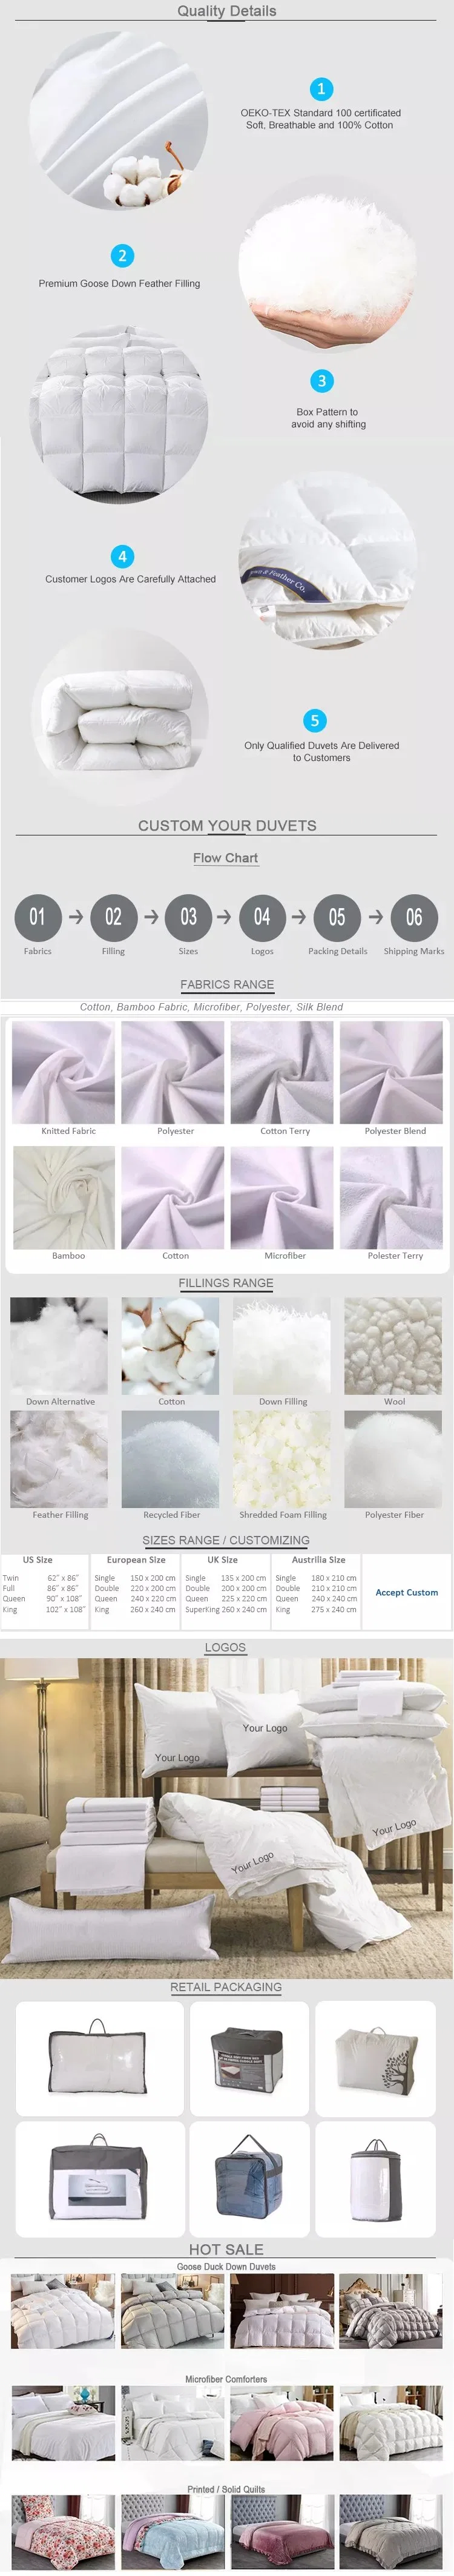 100% Goose Down Filling Warm and Thick Bedding Pure White Comforter Duvet